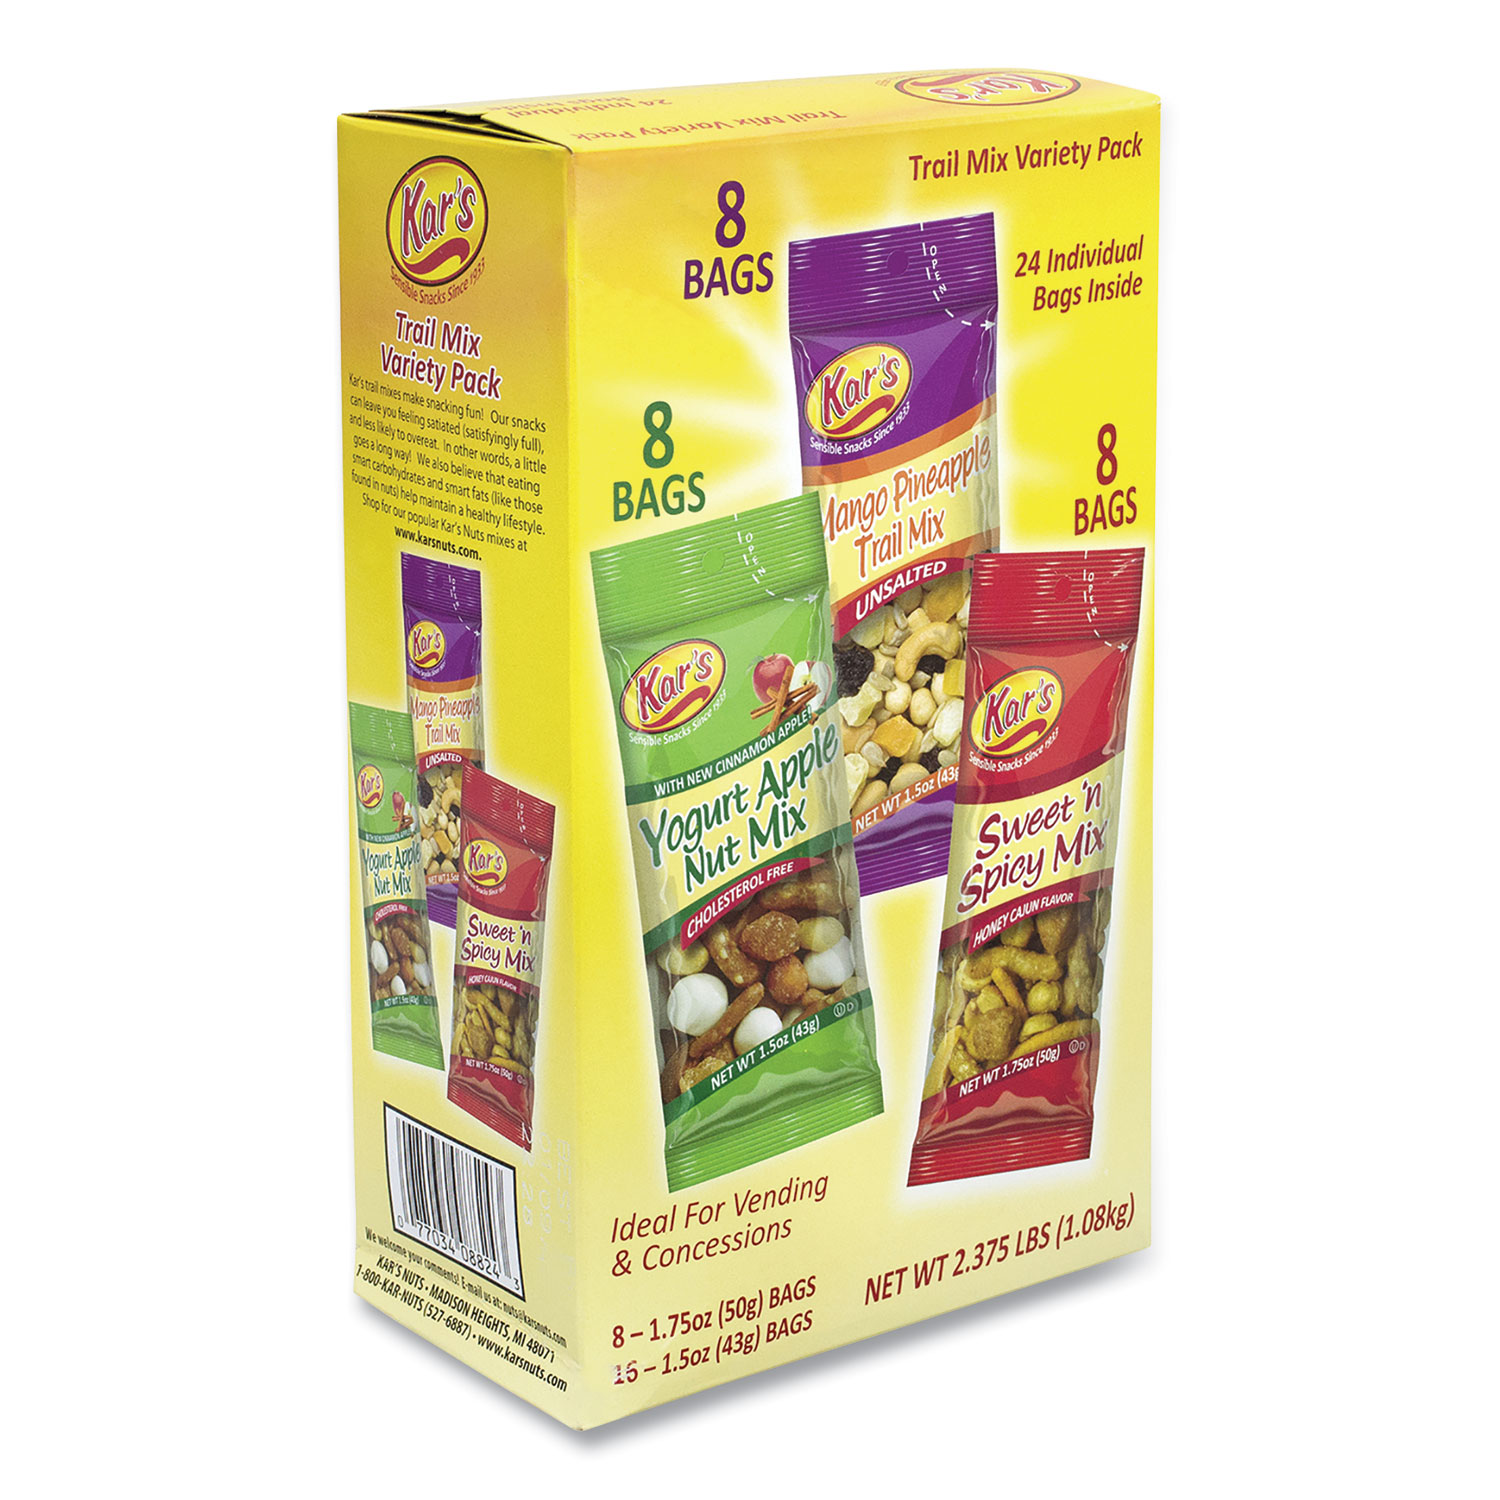  Kar's 83610 Trail Mix Variety Pack, Assorted Flavors, 24 Packets/Box, Free Delivery in 1-4 Business Days (GRR28800012) 